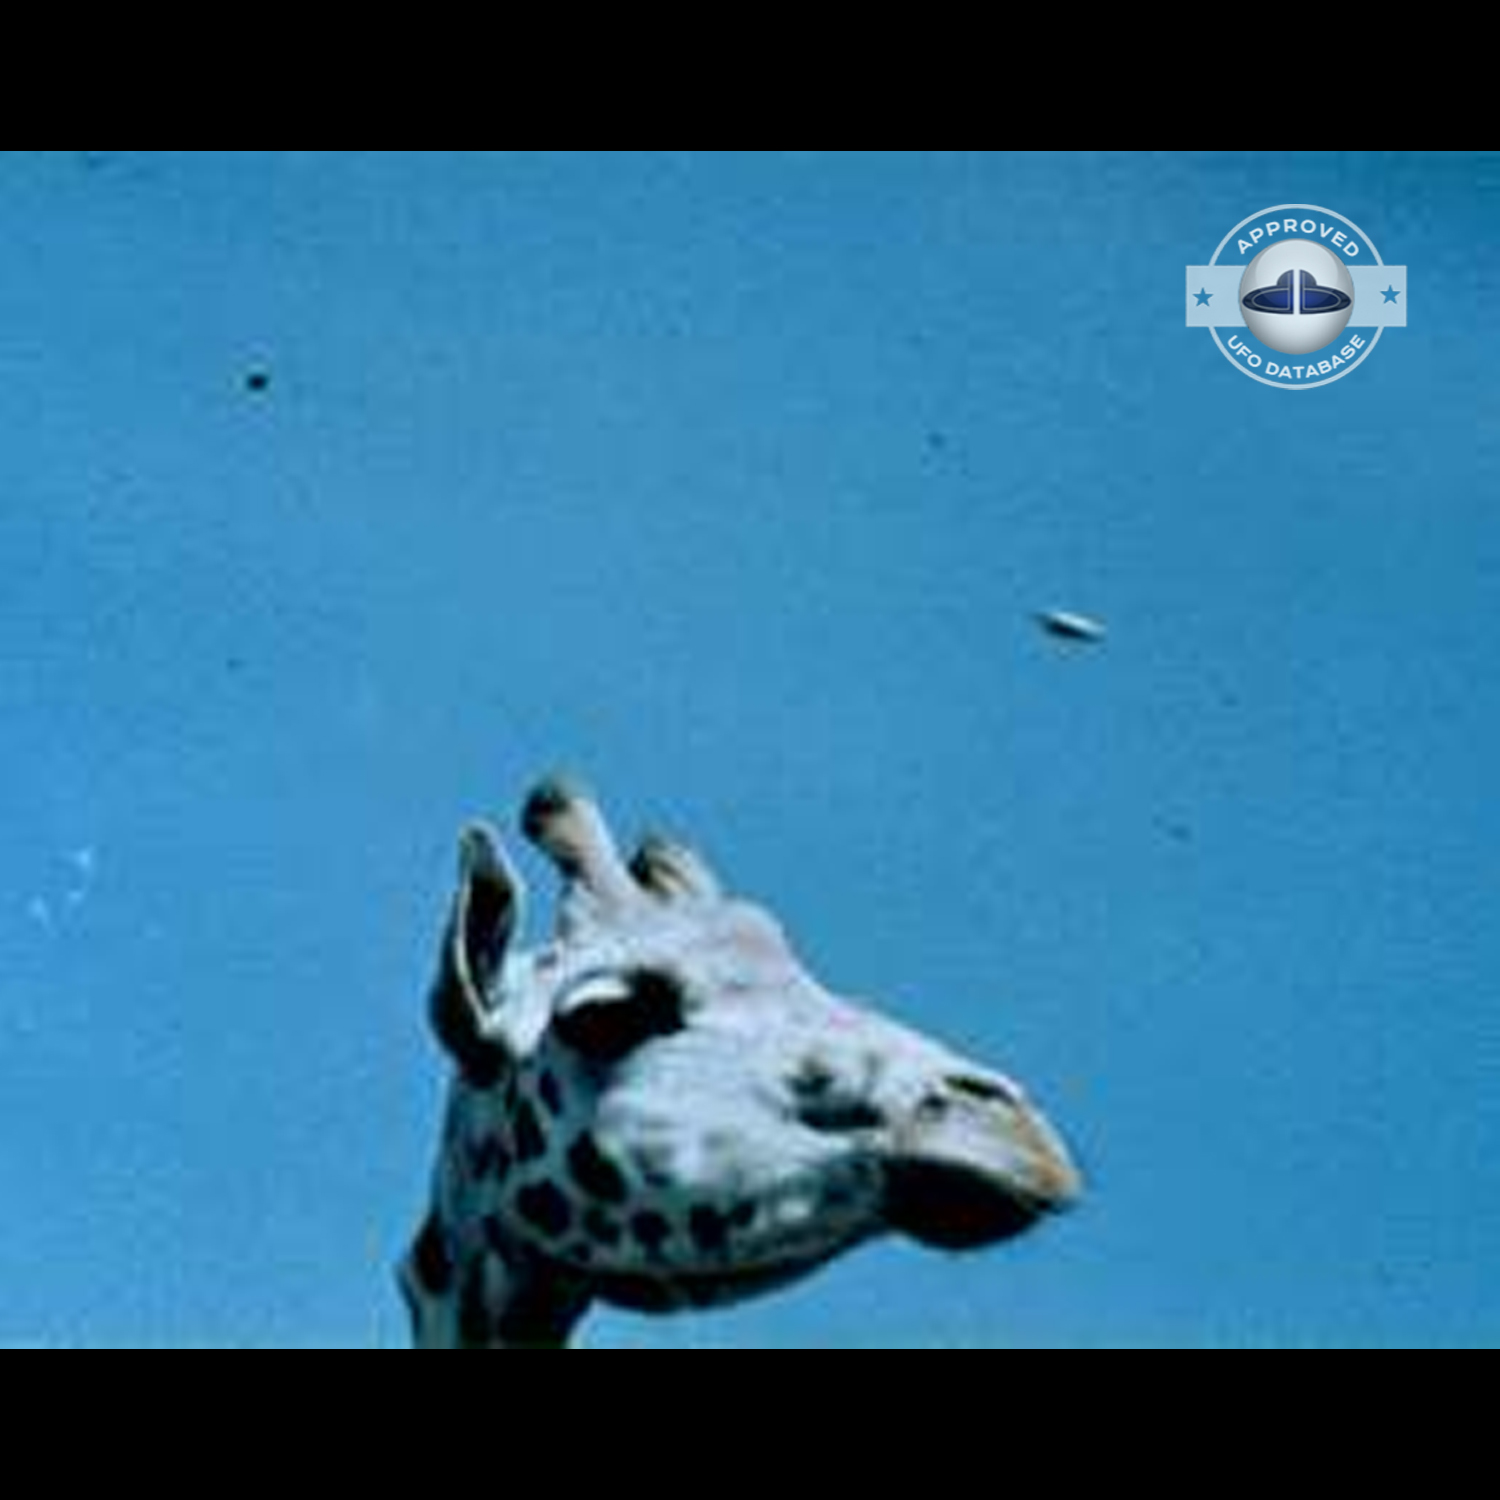 UFO picture shot in Plymouth Zoo which was located in Central Park UFO Picture #132-2